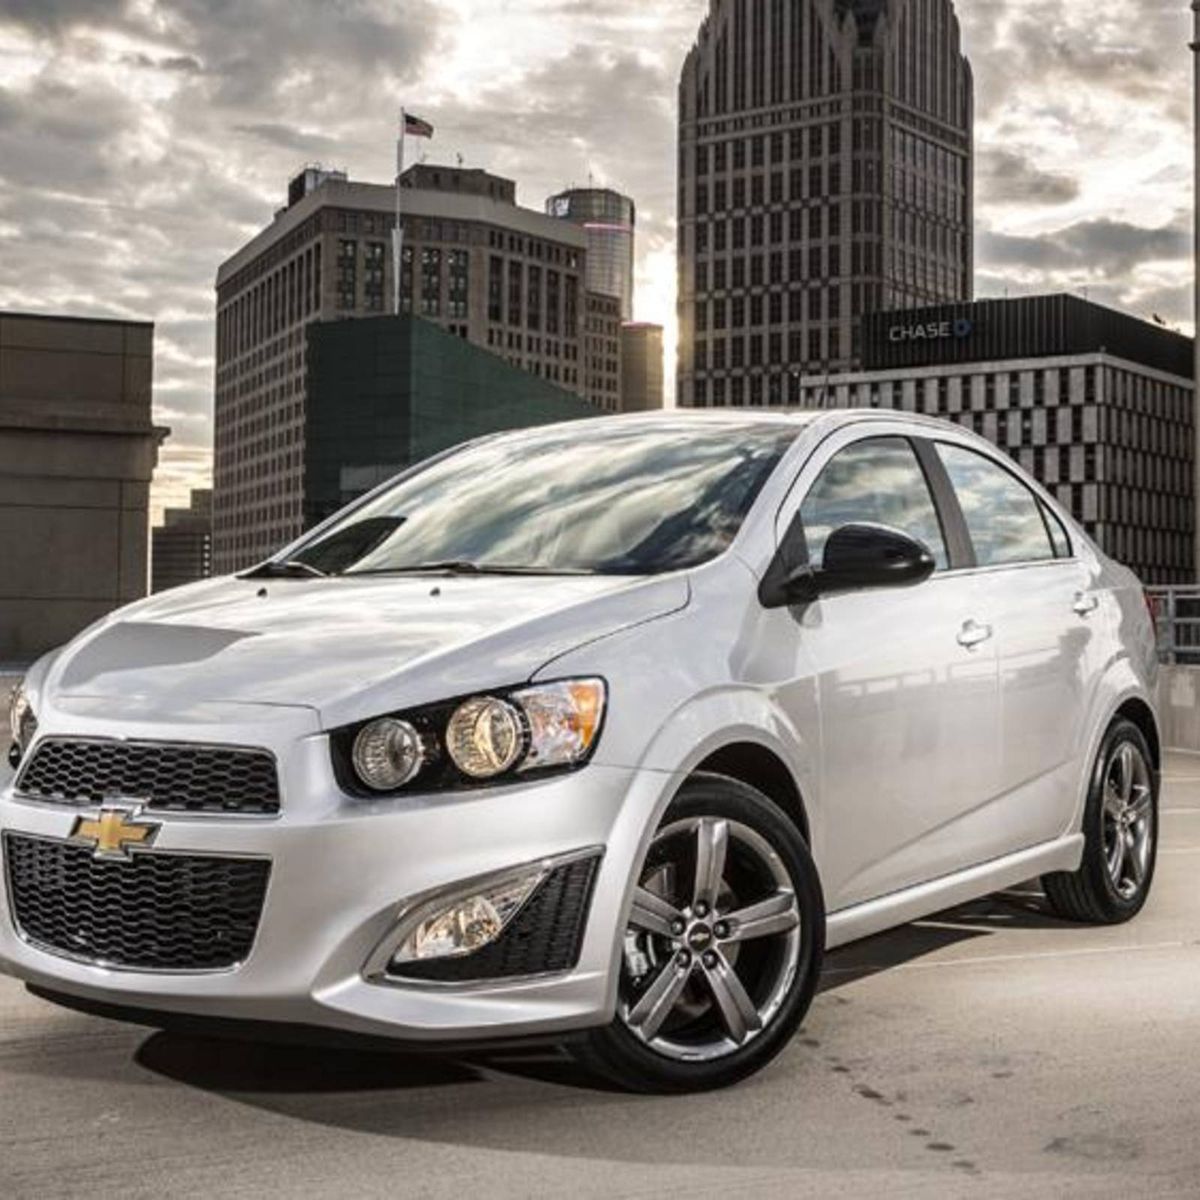 2014 Chevrolet Sonic Preview, Car News